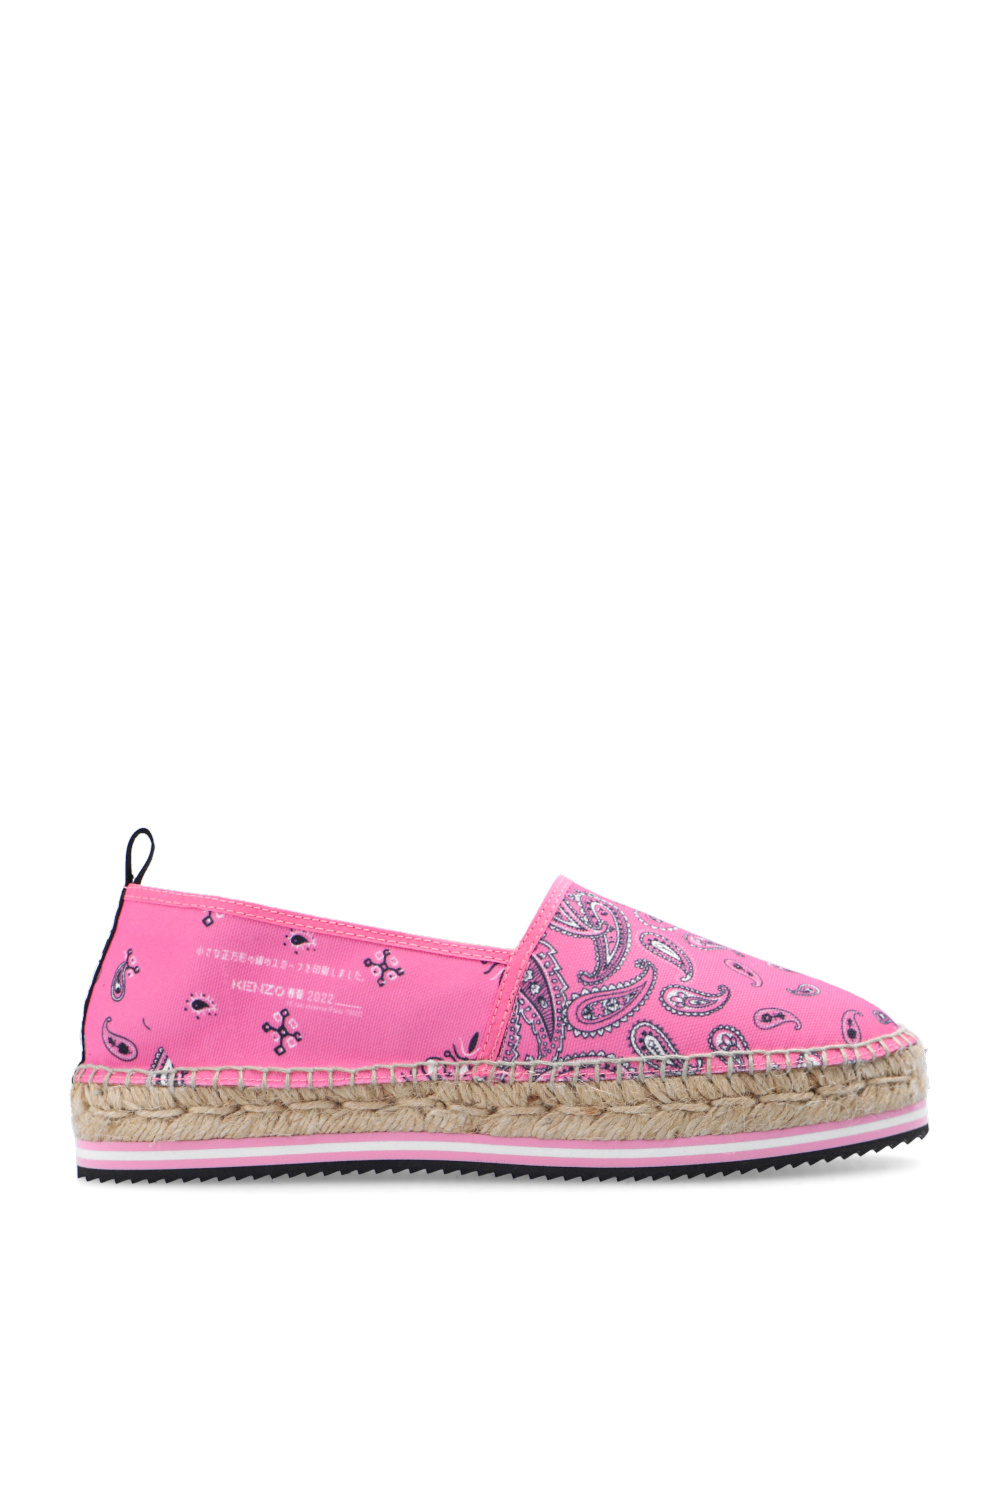 IetpShops Morocco - jeans and sneaker - Espadrilles with 'Bandana' print  Kenzo